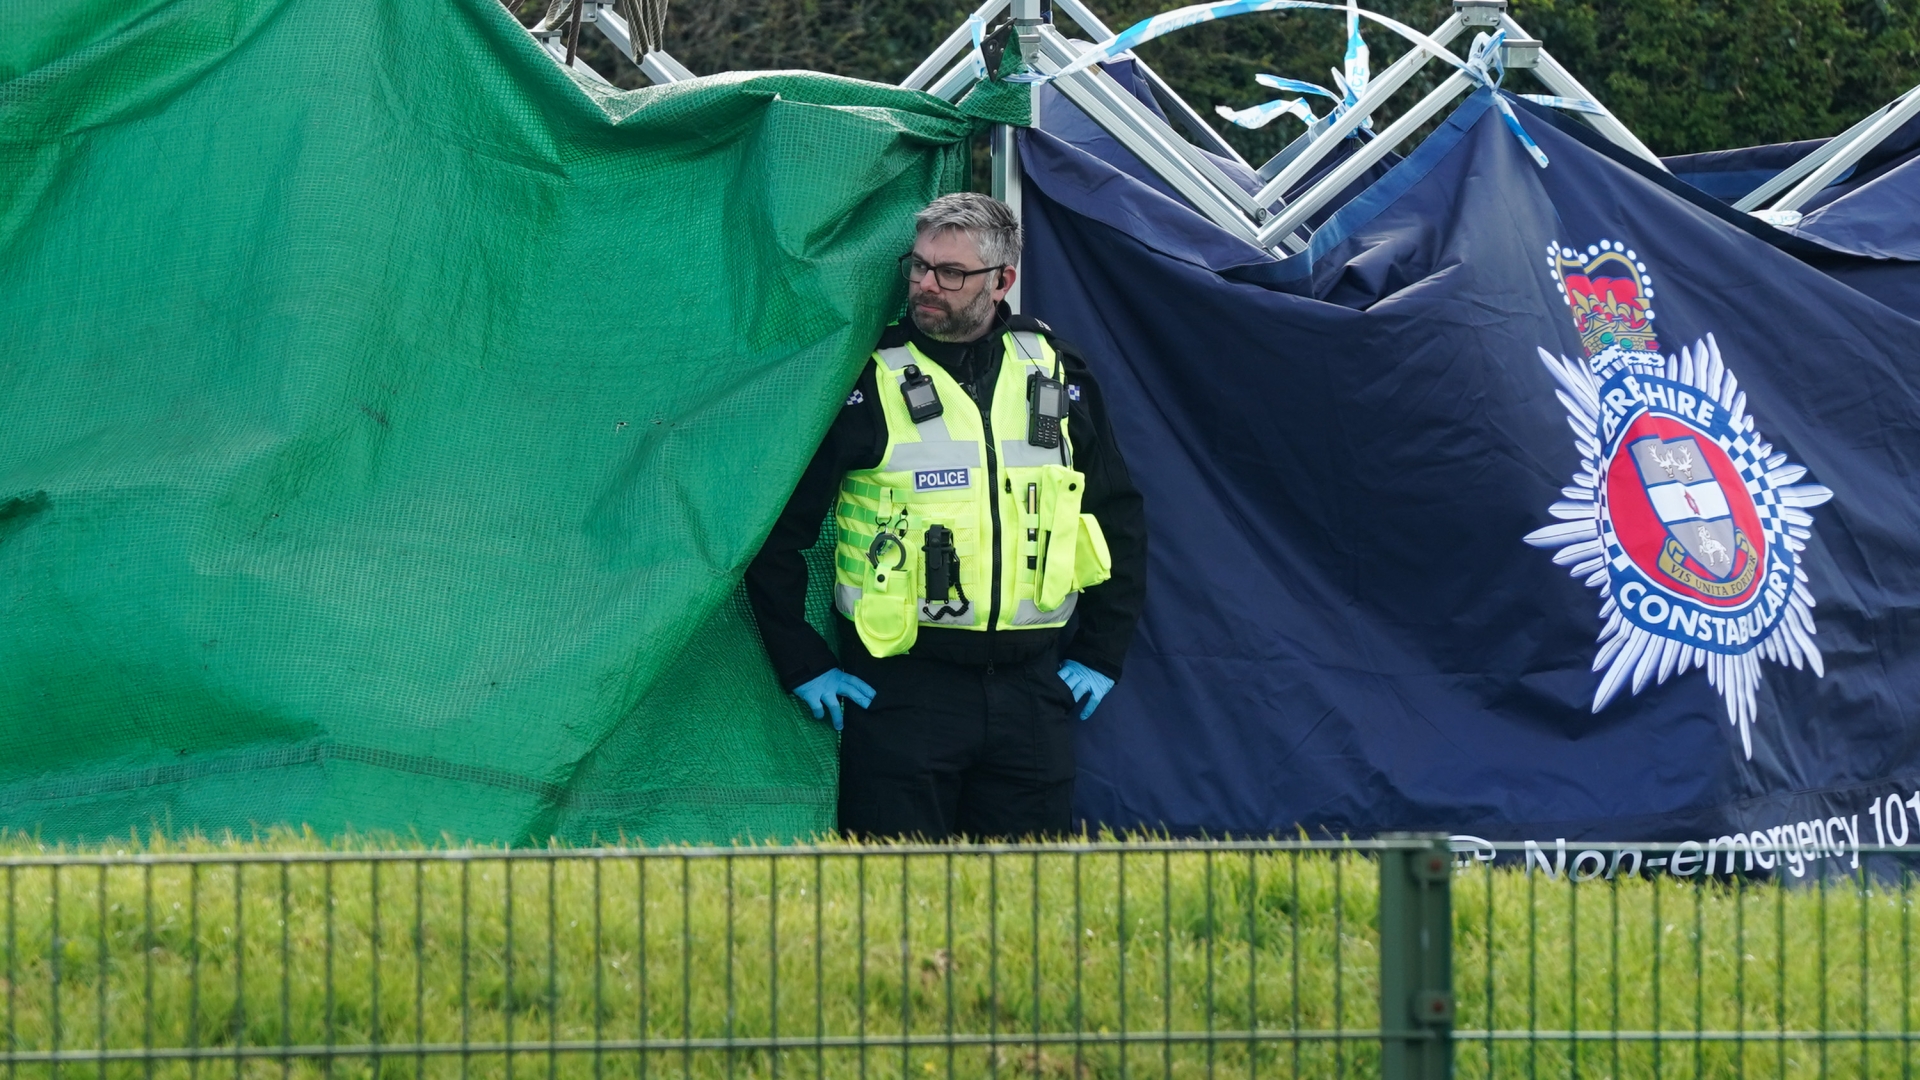 Police launch investigation into the tragedy after finding a body of a man in slum children’s play area